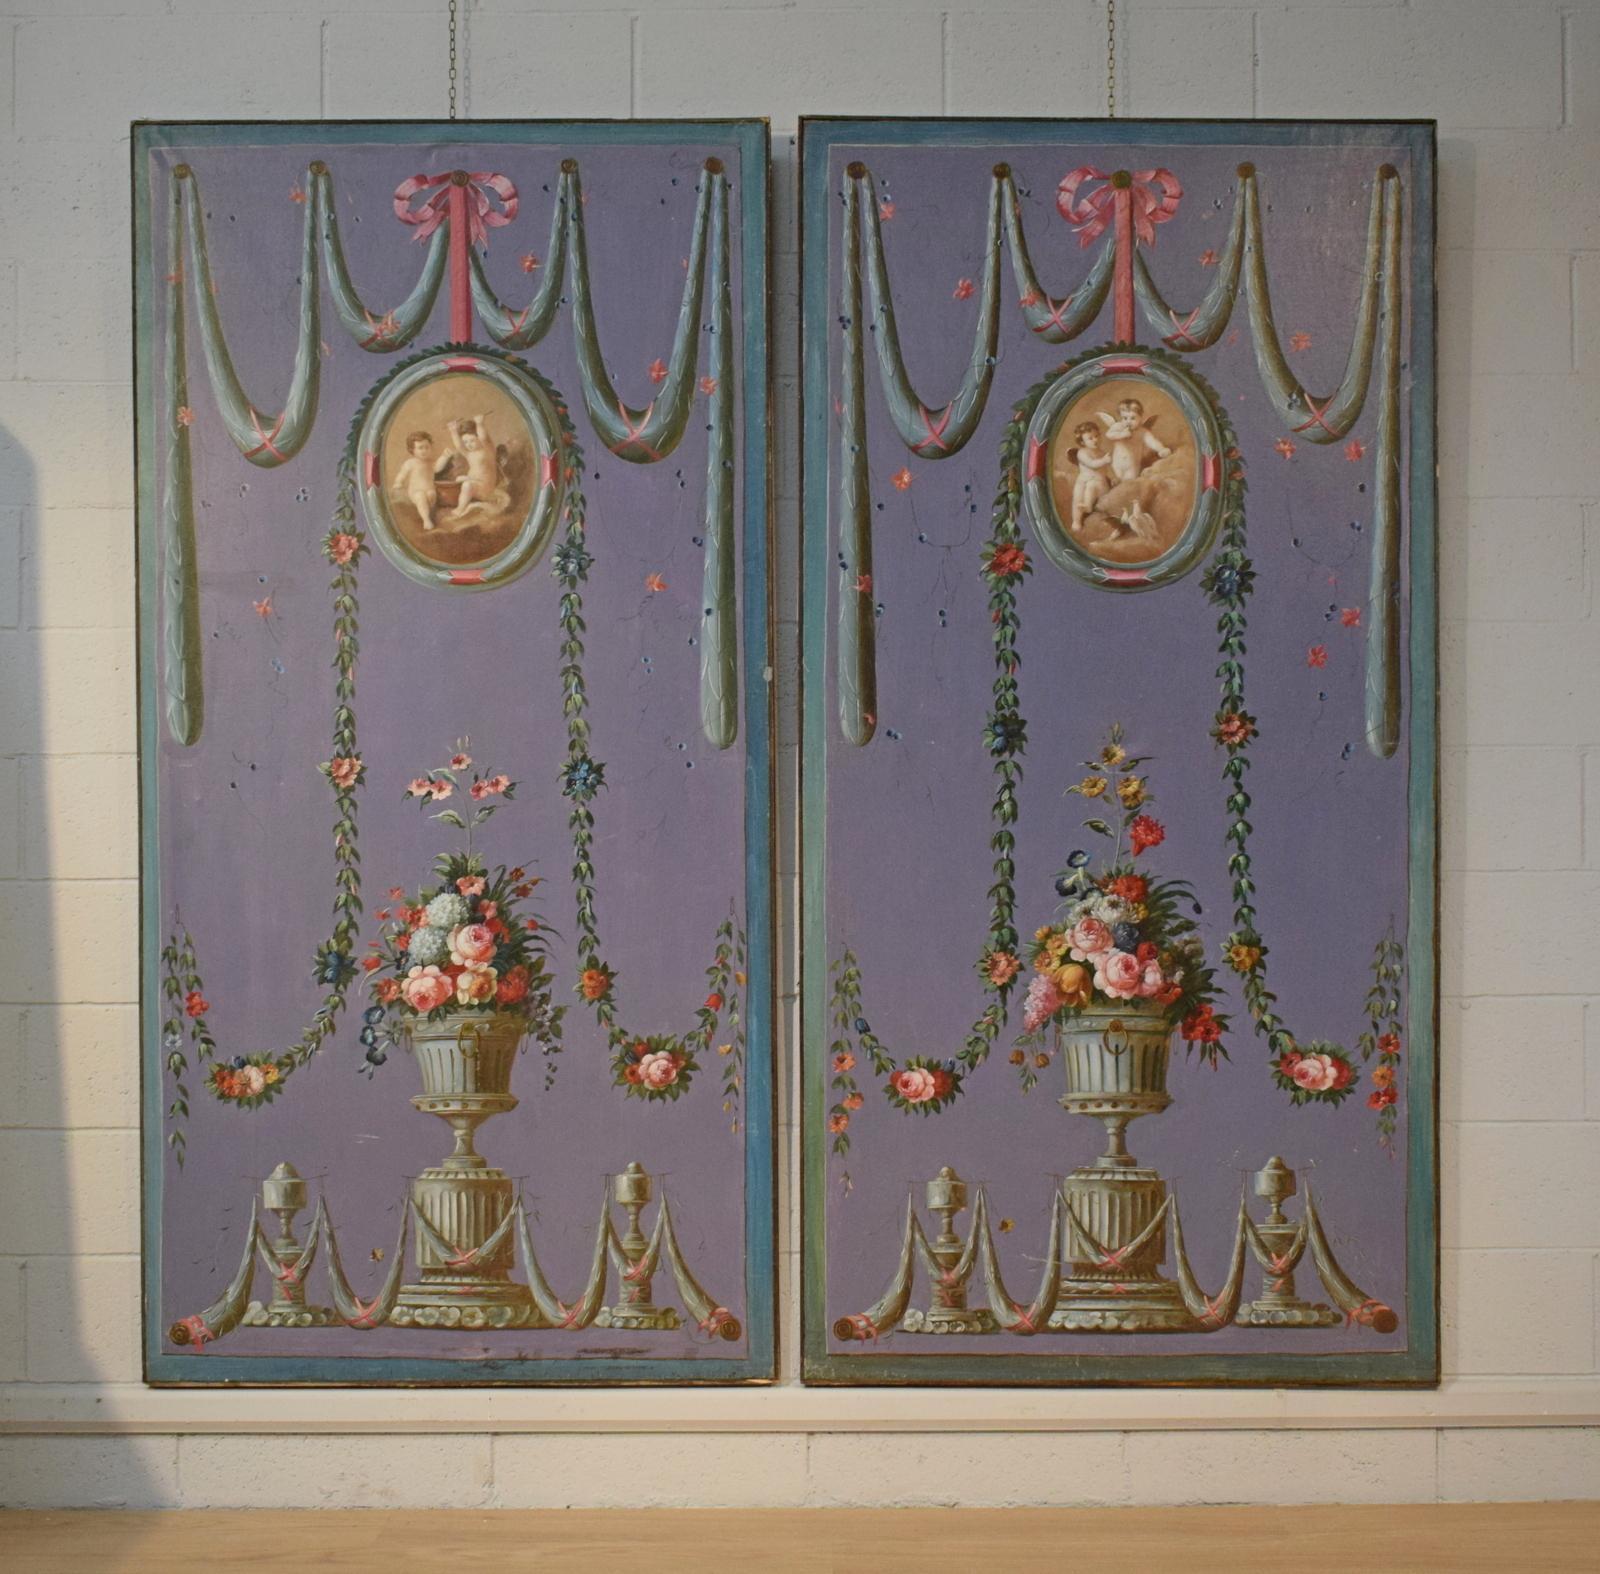 19th century, couple of oil on canvas Italian neoclassical style vases and floral garlands paintings

The pair of large oil on canvas paintings presents a decoration of neoclassical style. On a cerulean background are painted vases and flowers,